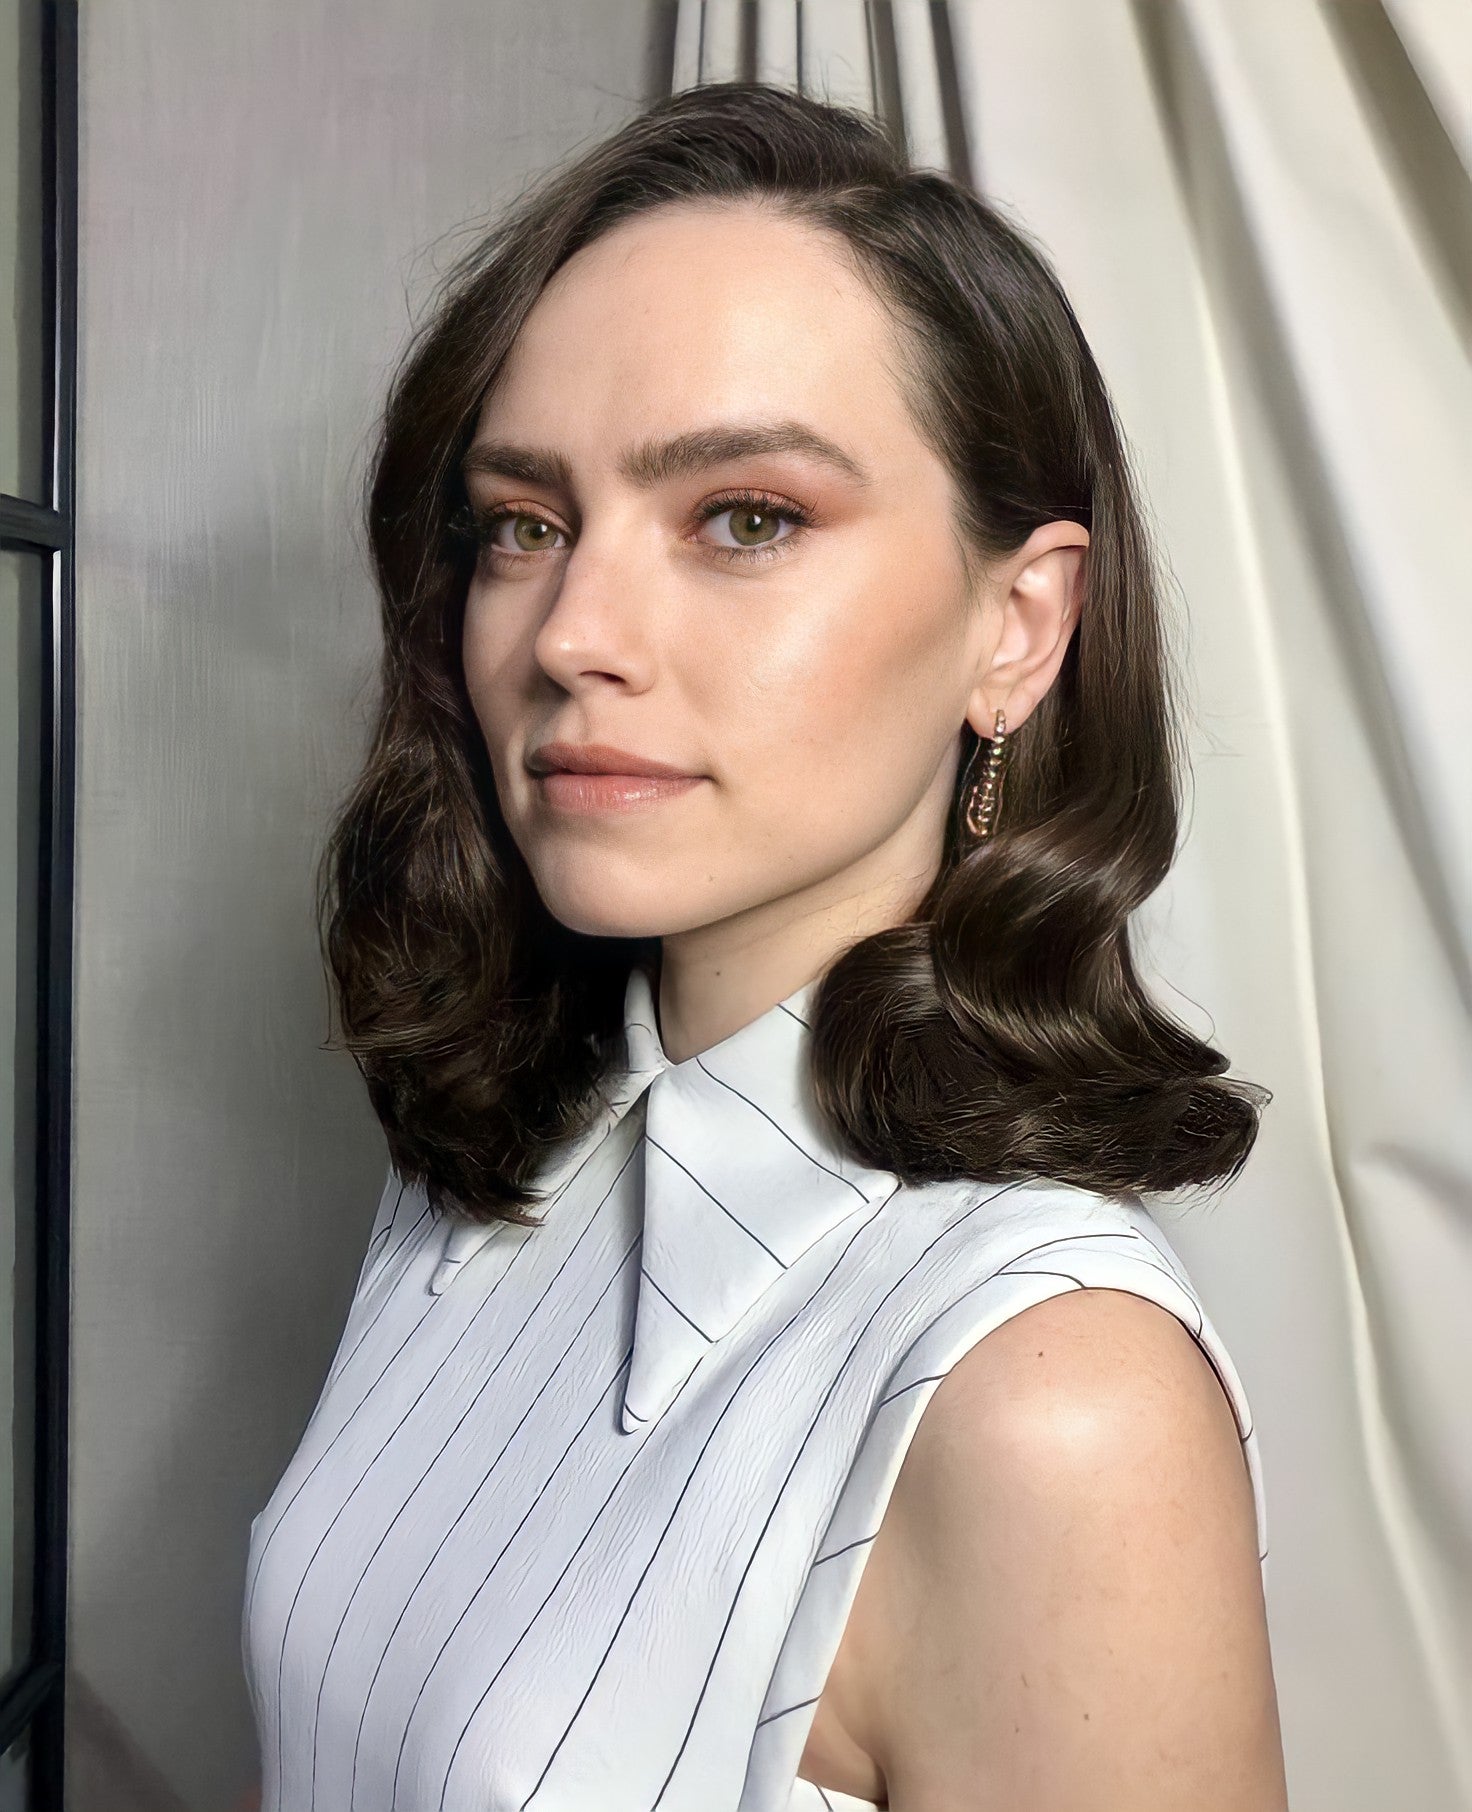 Daisy Ridley Is Another Pale Bitch That Needs Her Throat Fucked Hard